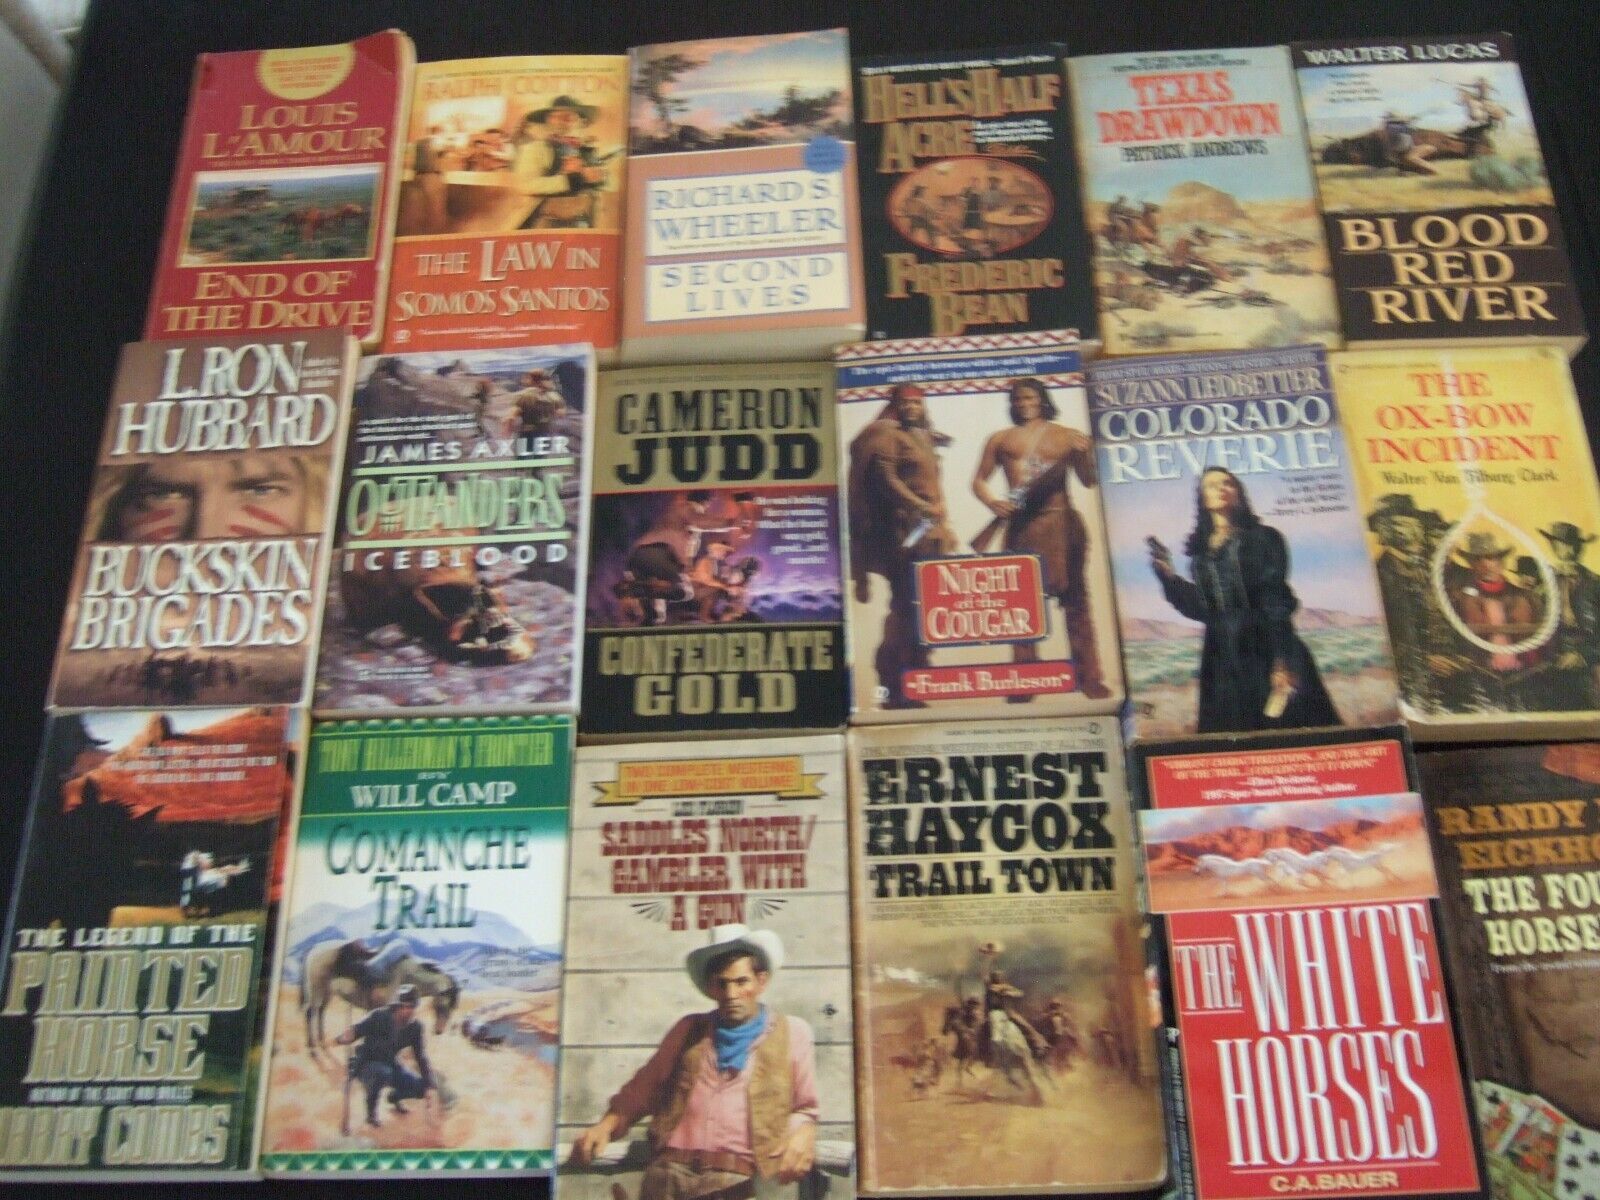 Primary image for Lot of 15 WESTERN COWBOY VINTAGE PAPERBACKS See photos for authors series titles